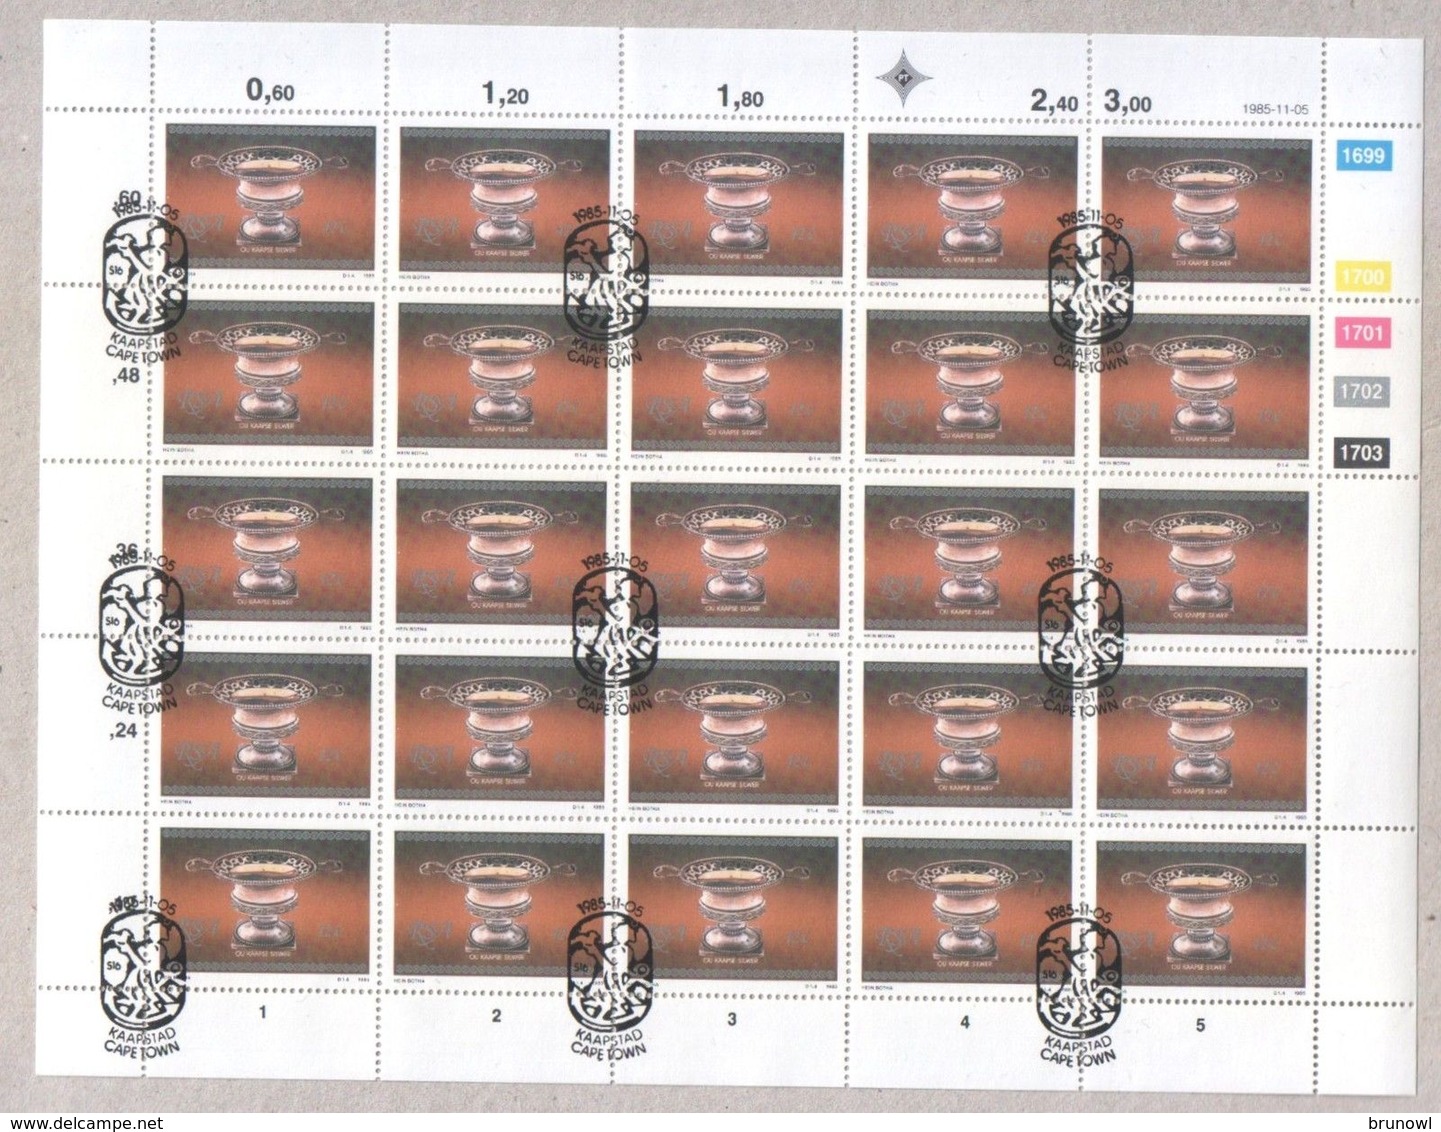 South Africa 1985 Silver Objects Set Sheets of CTO Stamps Special Cancellation FDI